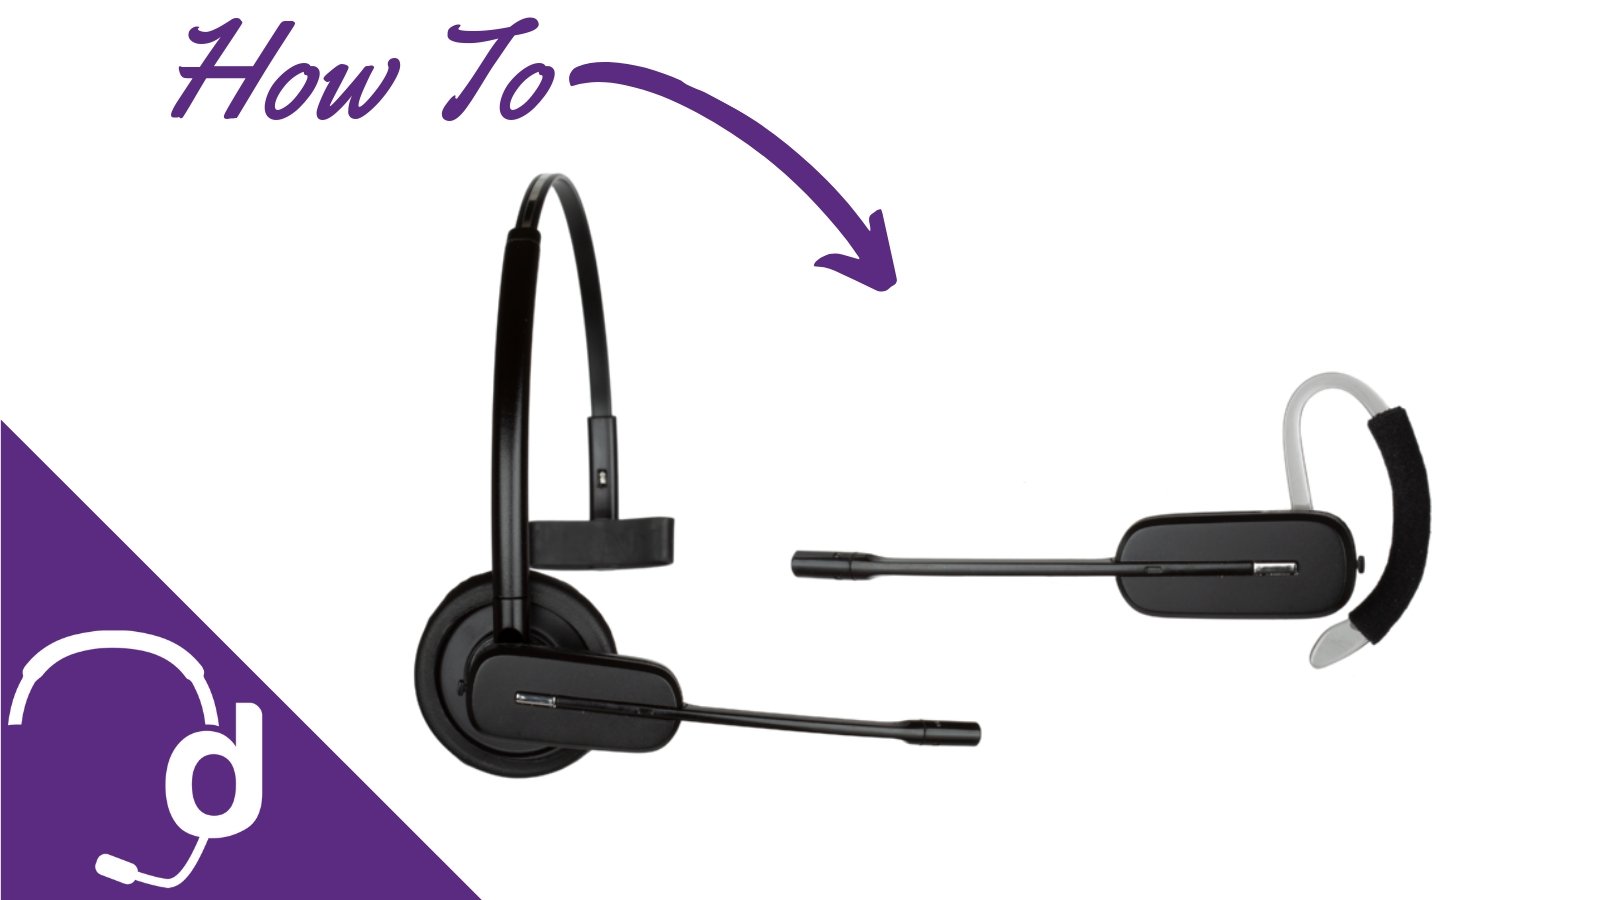 How To Switch Your Plantronics CS540 (C054) From An Ear Hook To Headband - Headset Advisor